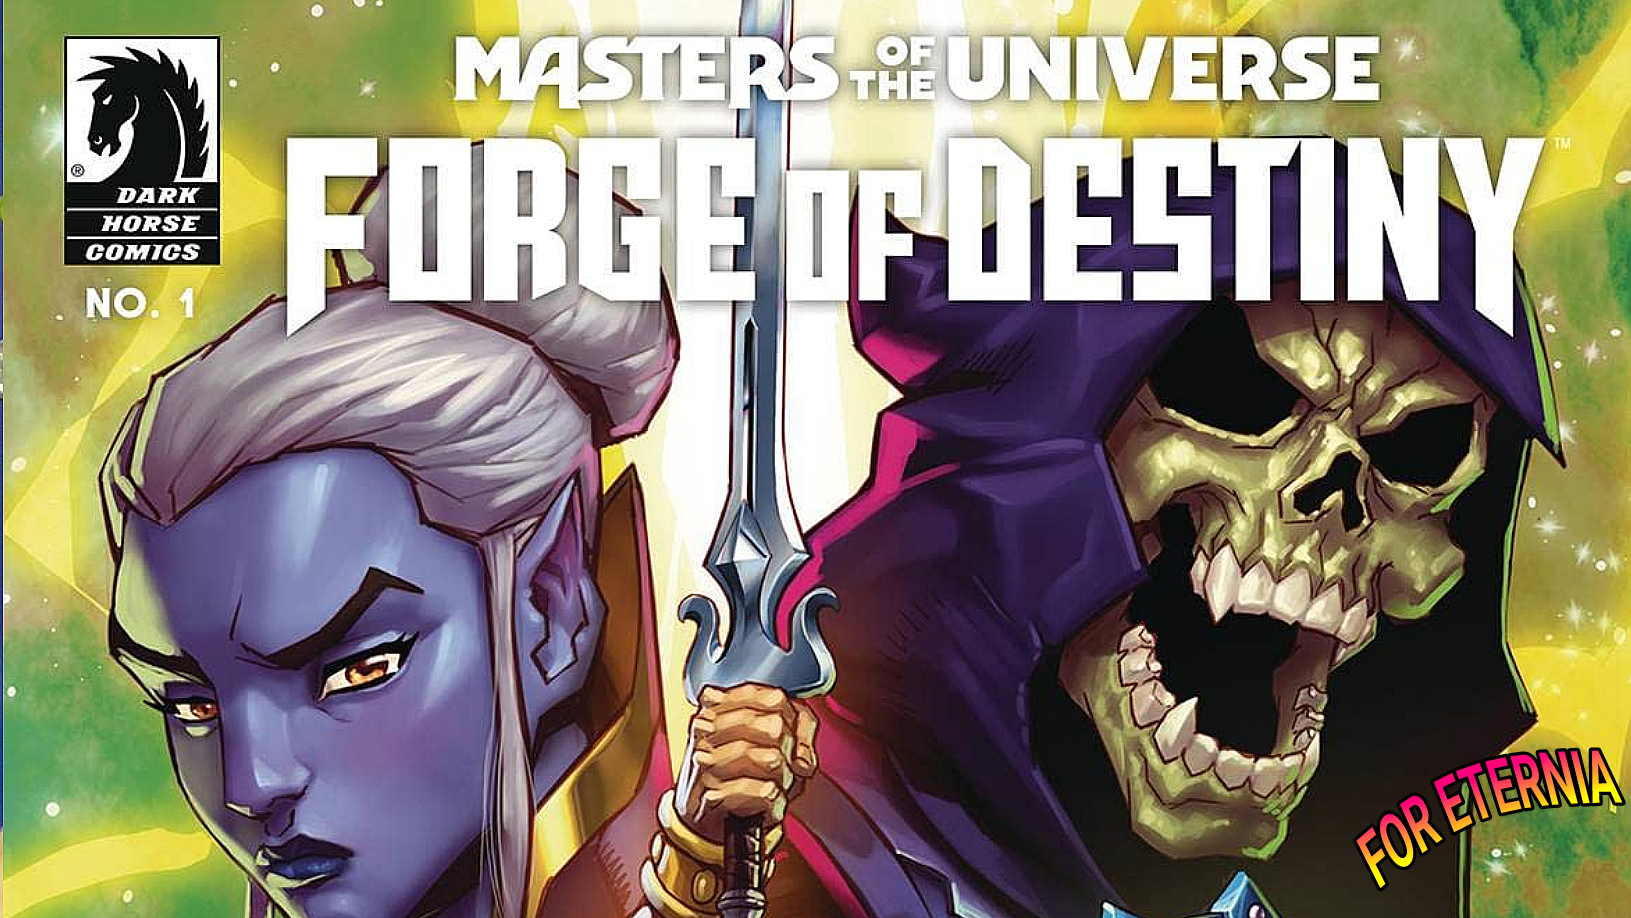 New Revelation Prequel Comic ”Masters of the Universe: Forge of Destiny” coming in September!